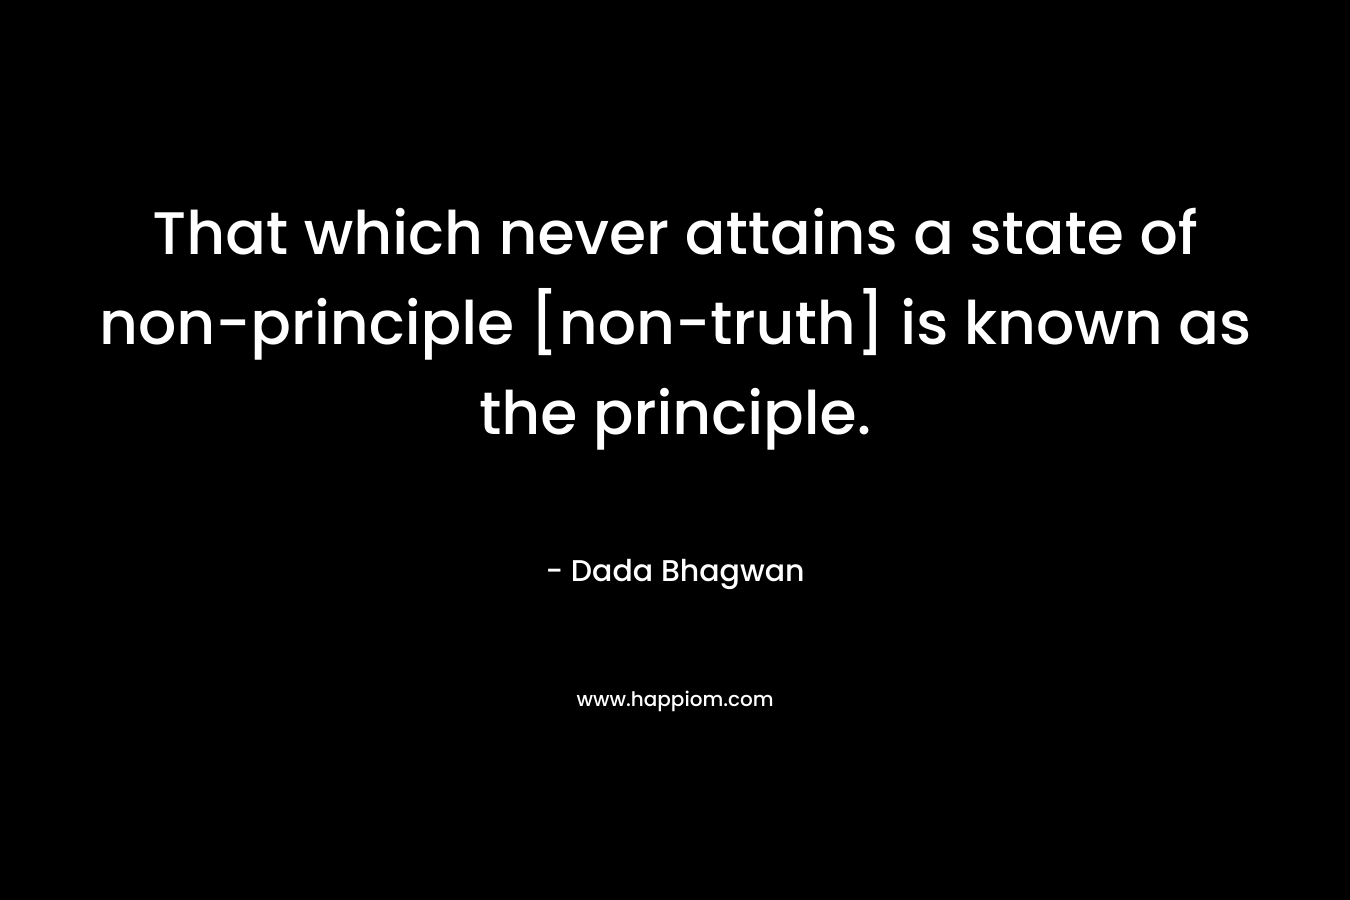 That which never attains a state of non-principle [non-truth] is known as the principle.